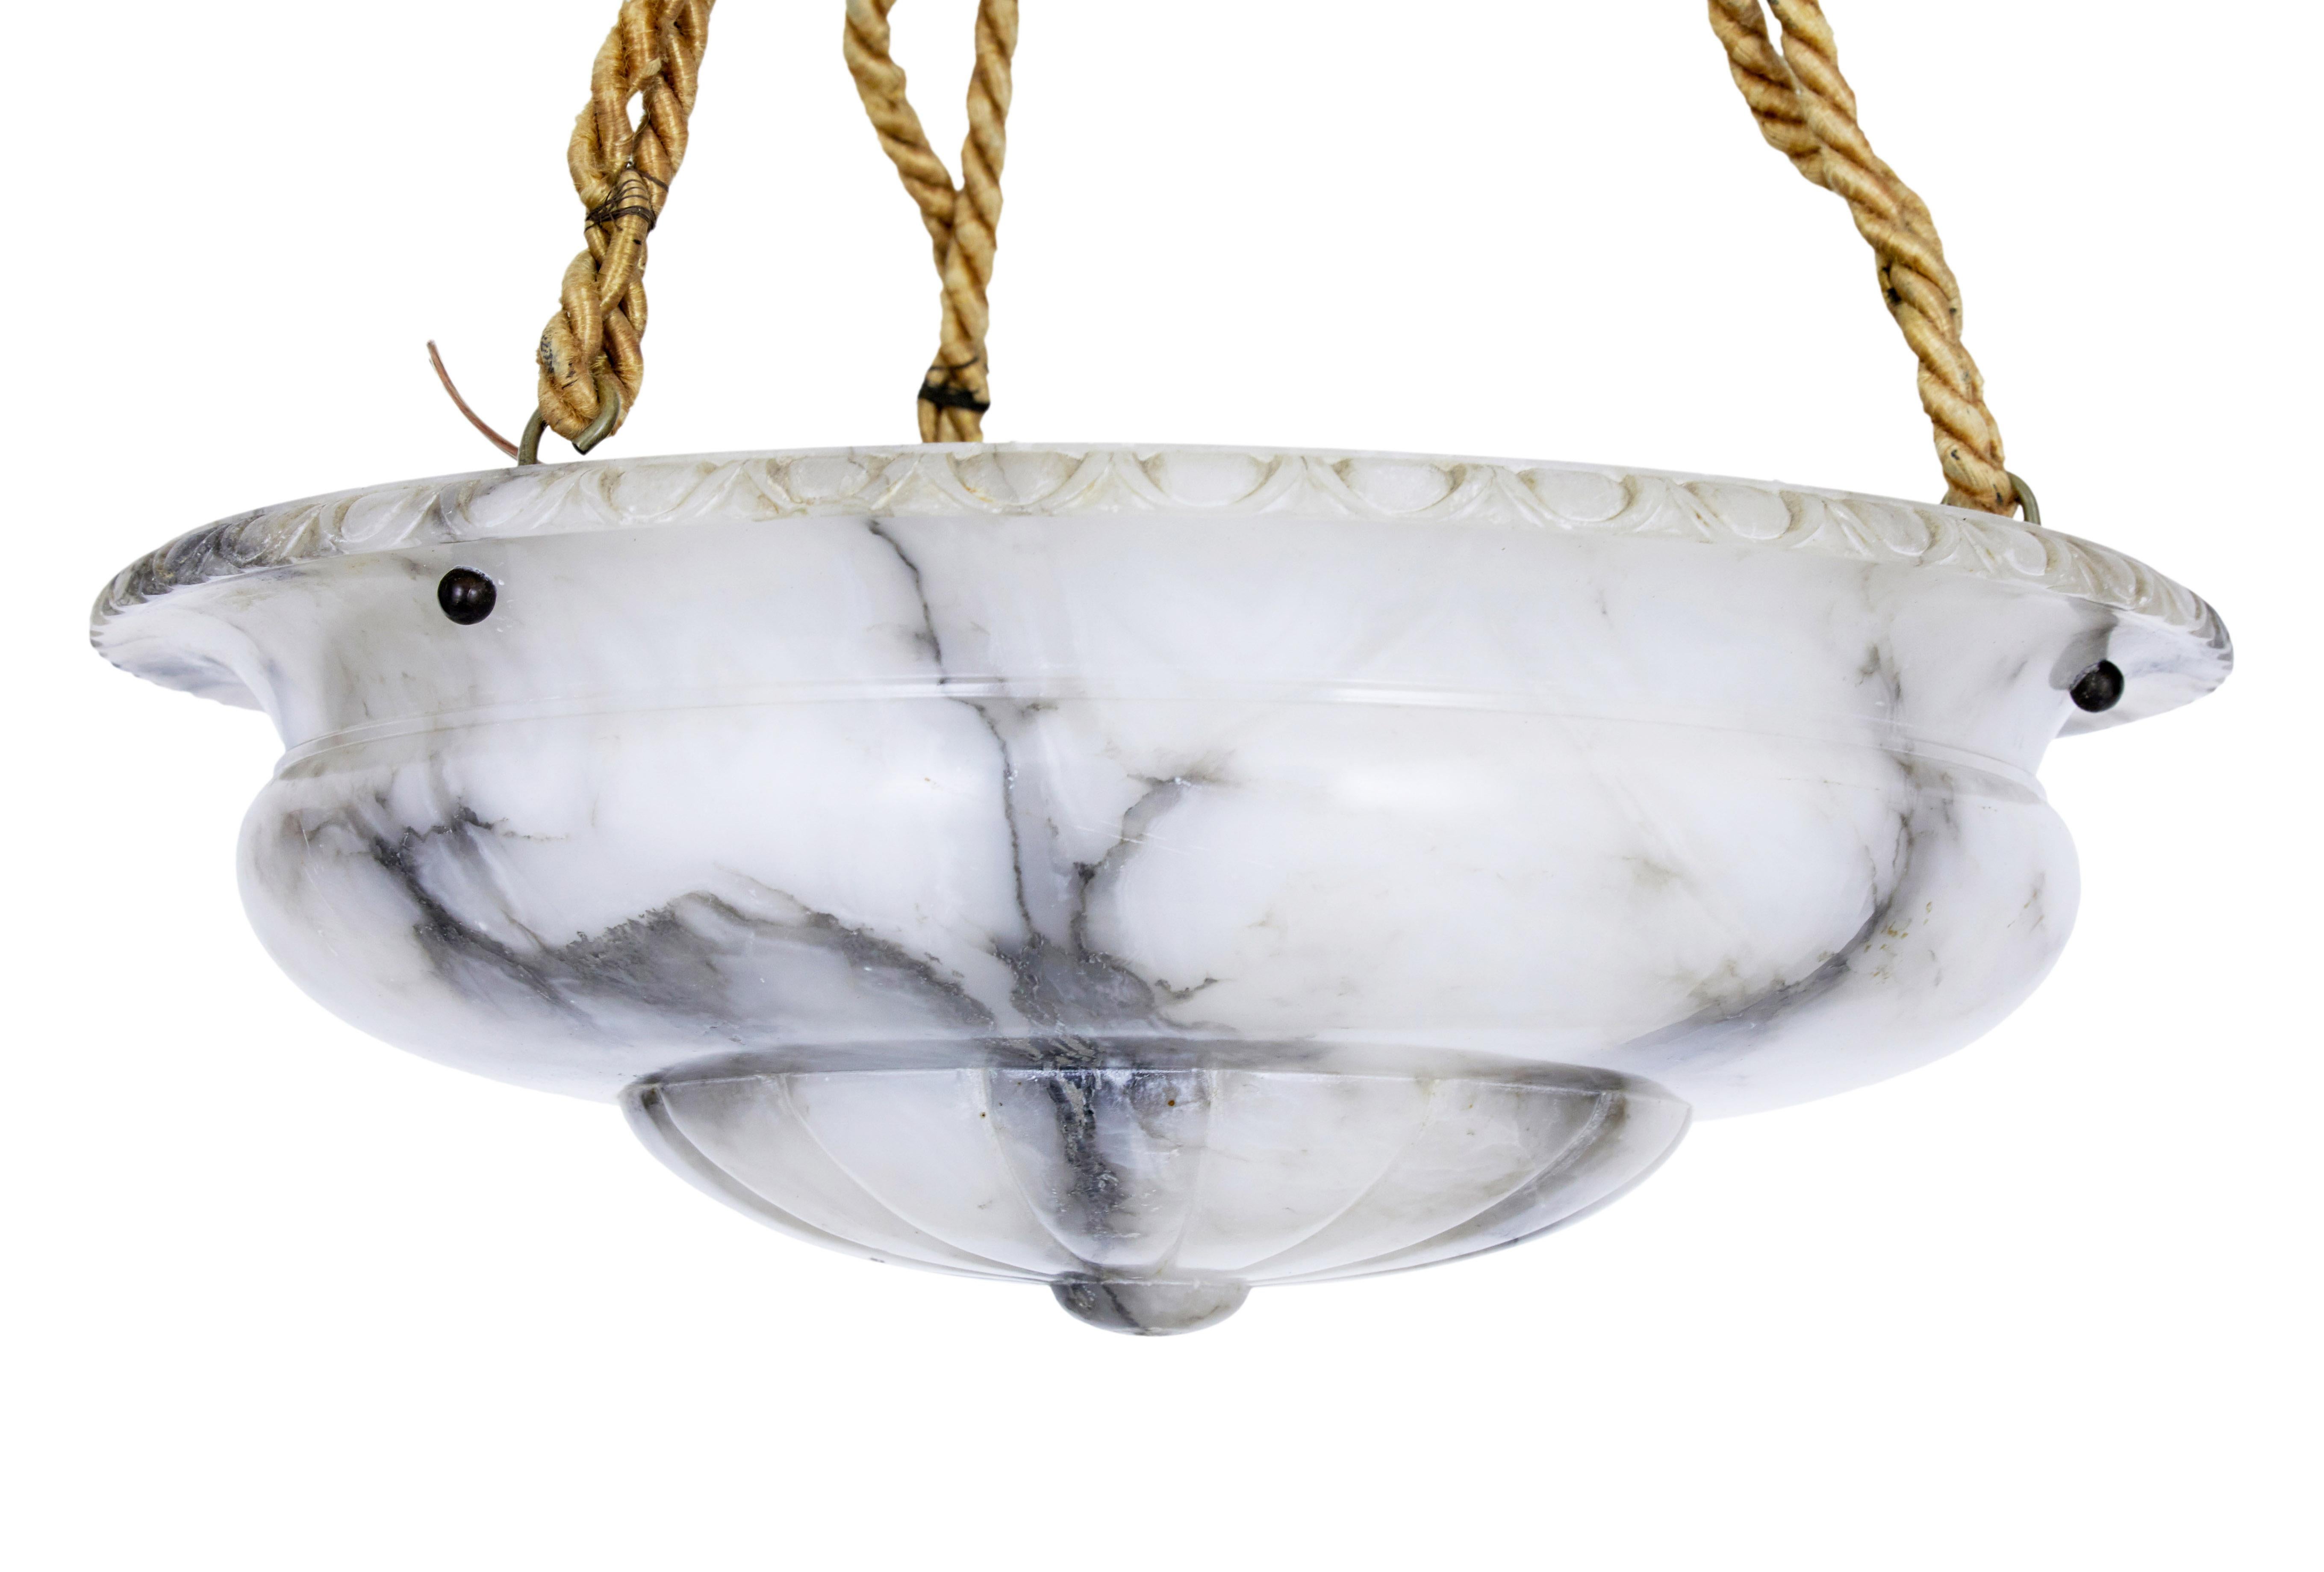 Art Deco grey alabaster hanging dish light circa 1930.

Beautiful grey veined carved alabaster chandelier from the Art Deco period. Carved alabaster bowl with carved rim, supported by 3 rope chains, leading up to a steel covered ceiling